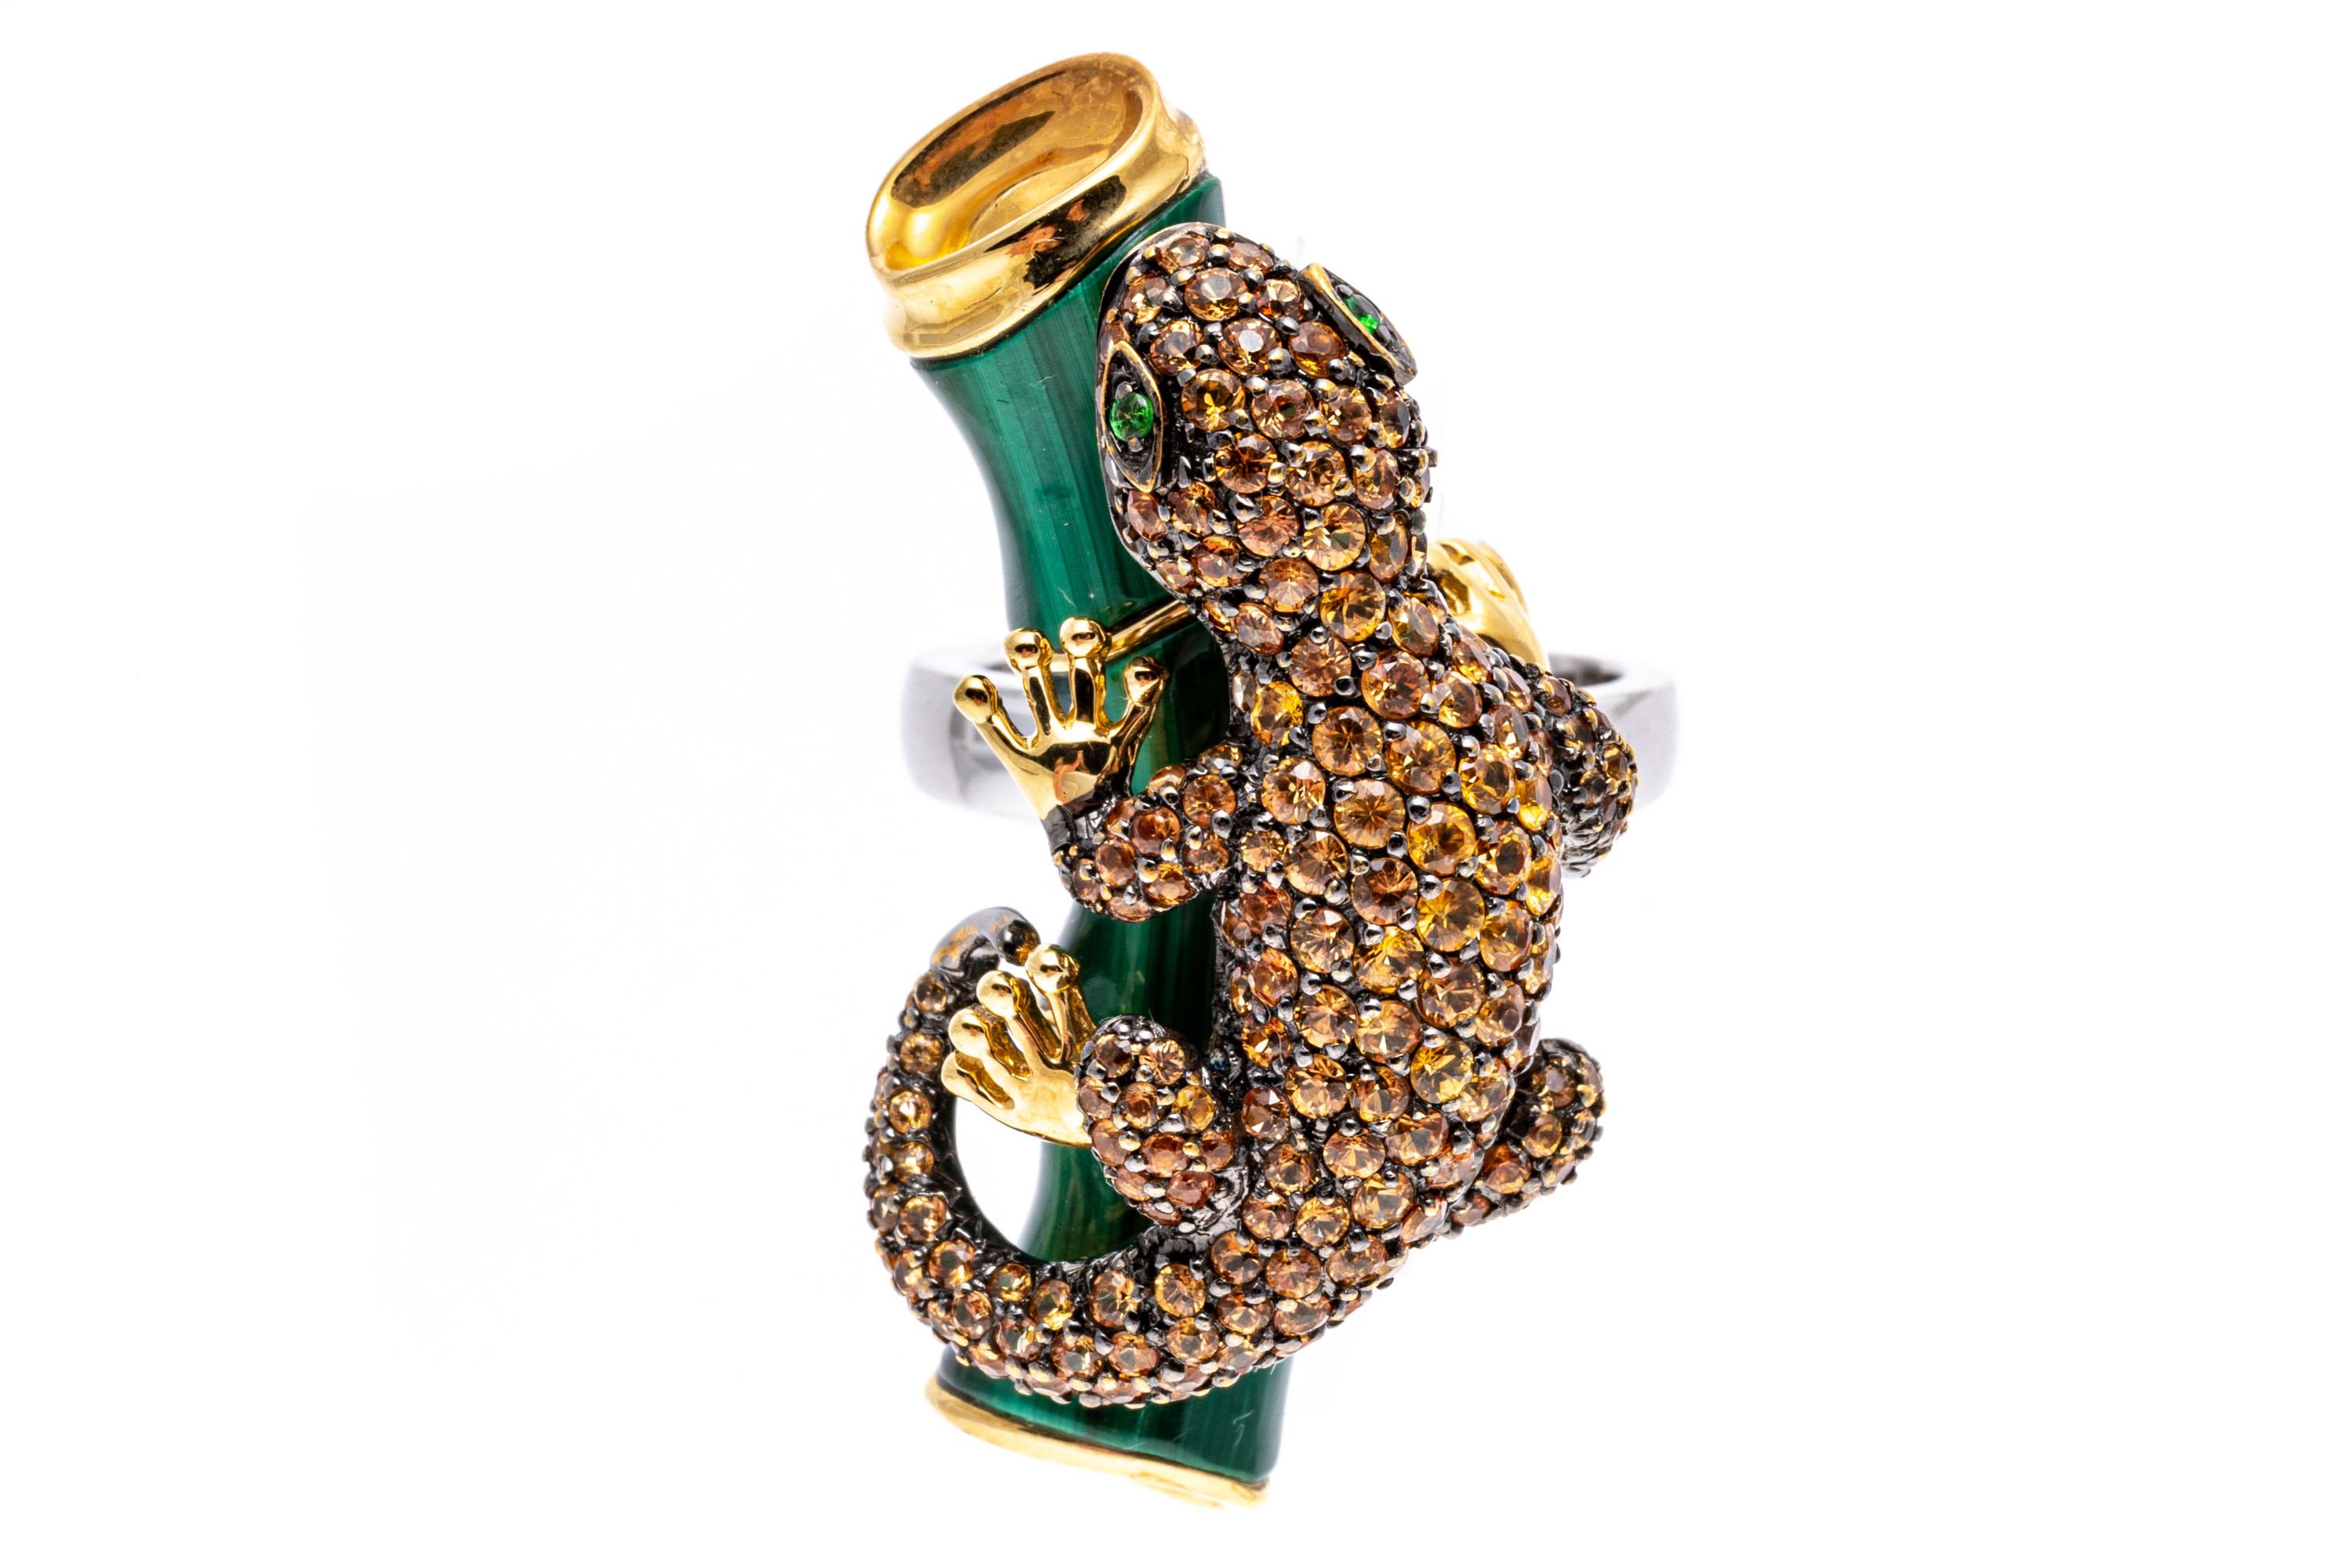 18k Gold Pave Topaz Salamander Ring/Pendant With Malachite For Sale 4